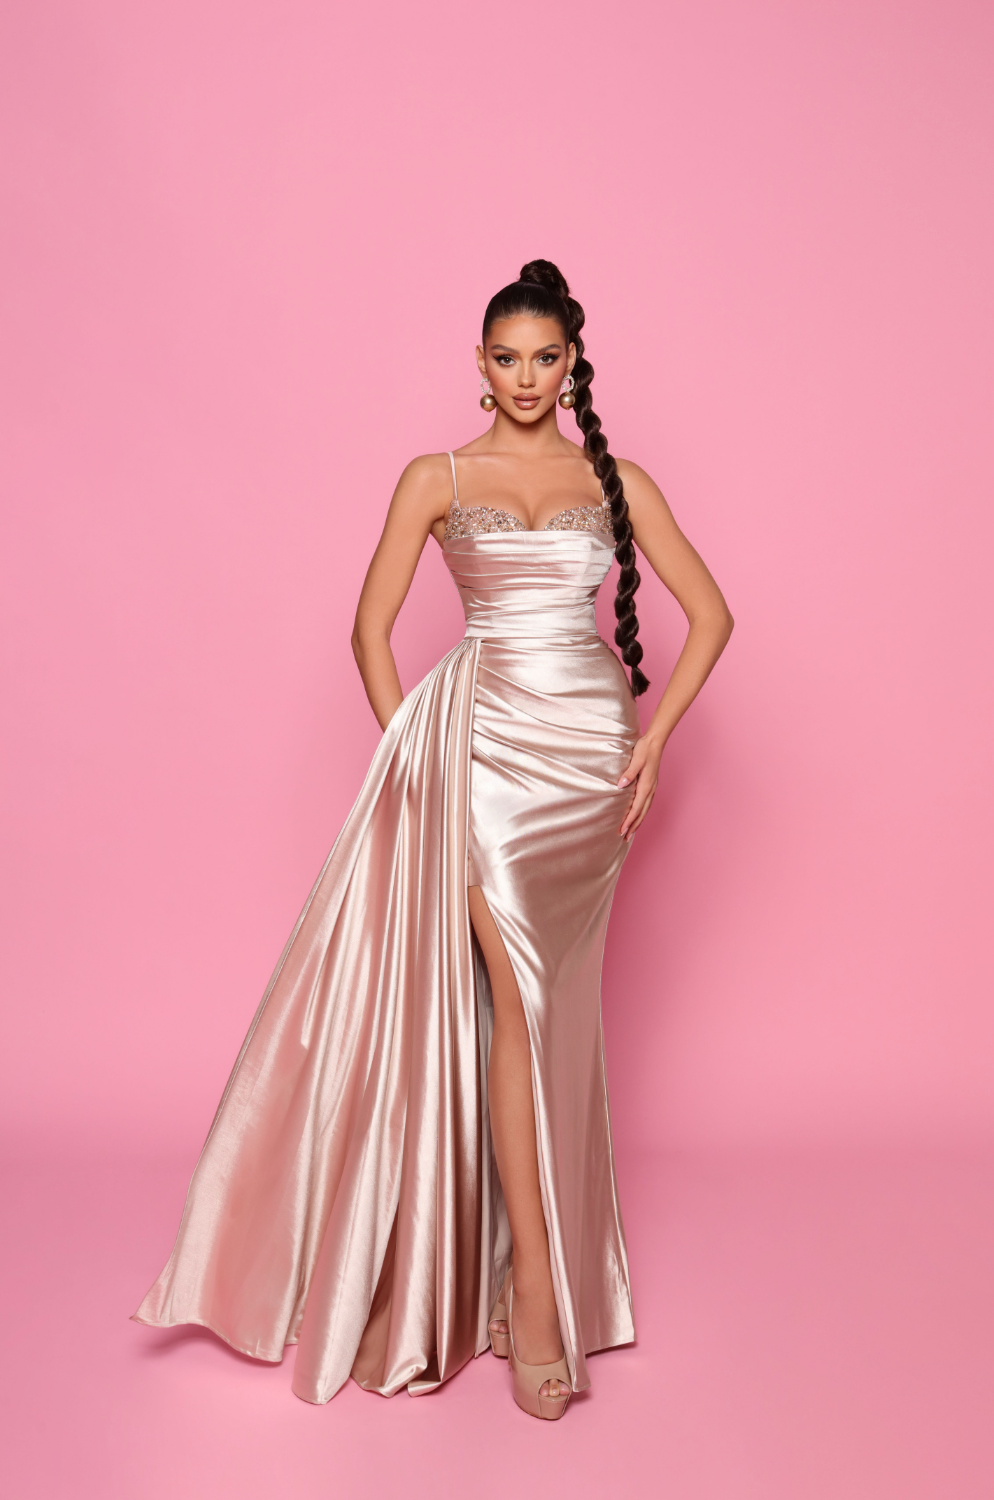 Nicoletta JP153 Jewel Adorned Sweetheart Evening Gown - A stunning evening gown with a jewel-adorned sweetheart neckline, ruching, and a thigh-high slit.